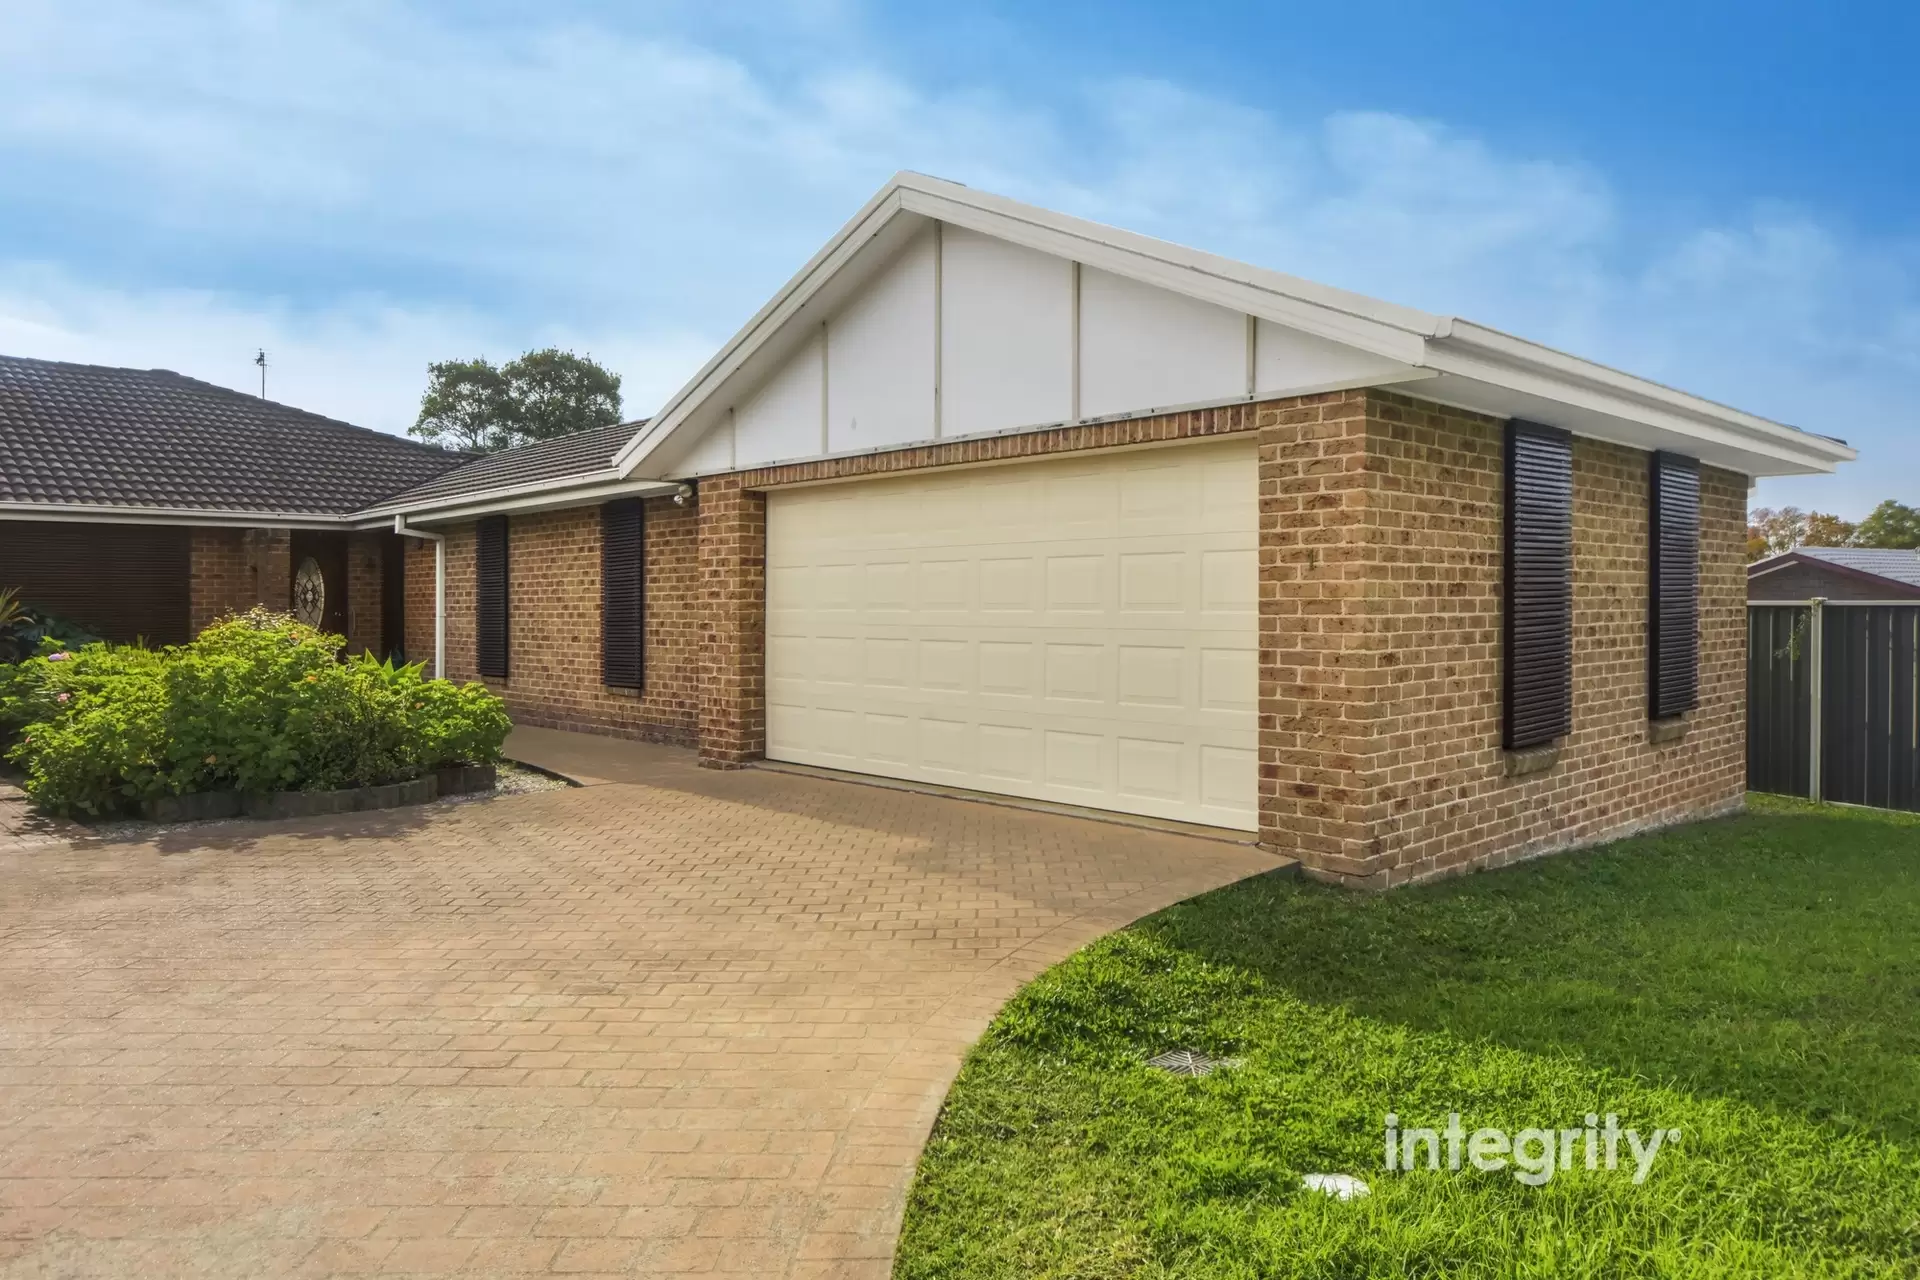 Testimonial from Duplex/Semi-detached buyer in Bomaderry